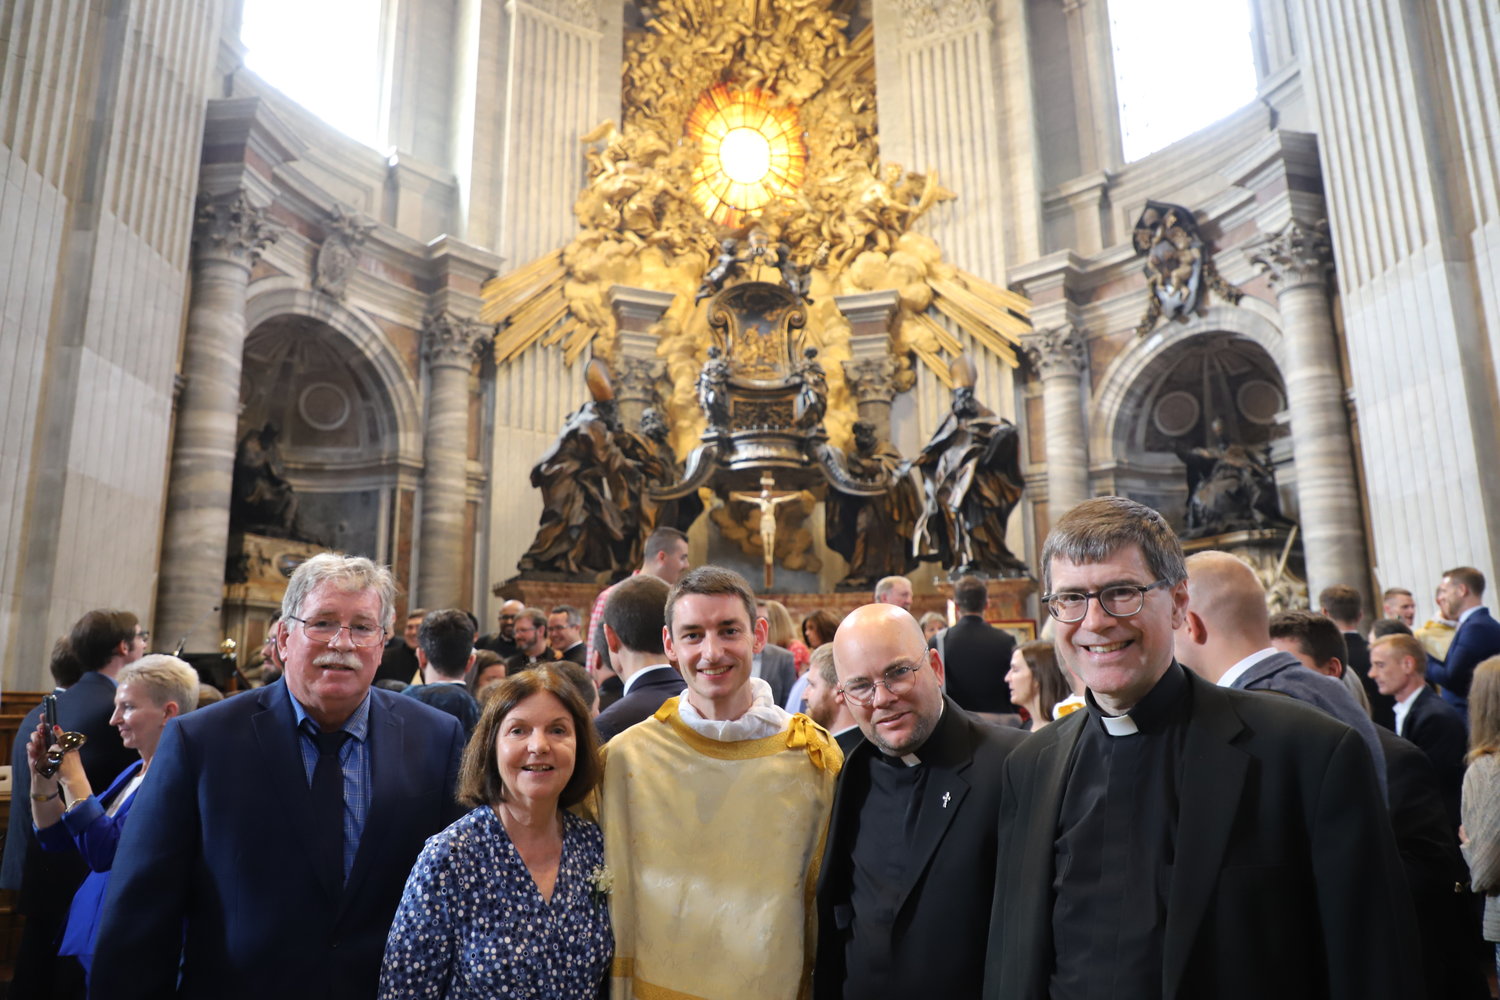 On the day of his ordination to the transitional diaconate, Patrick Ryan was joined by his parents, Doug and Ann Ryan, and fellow priests of the Diocese of Providence, including Father Brendan Rowley and Father Michael Woolley, at right.